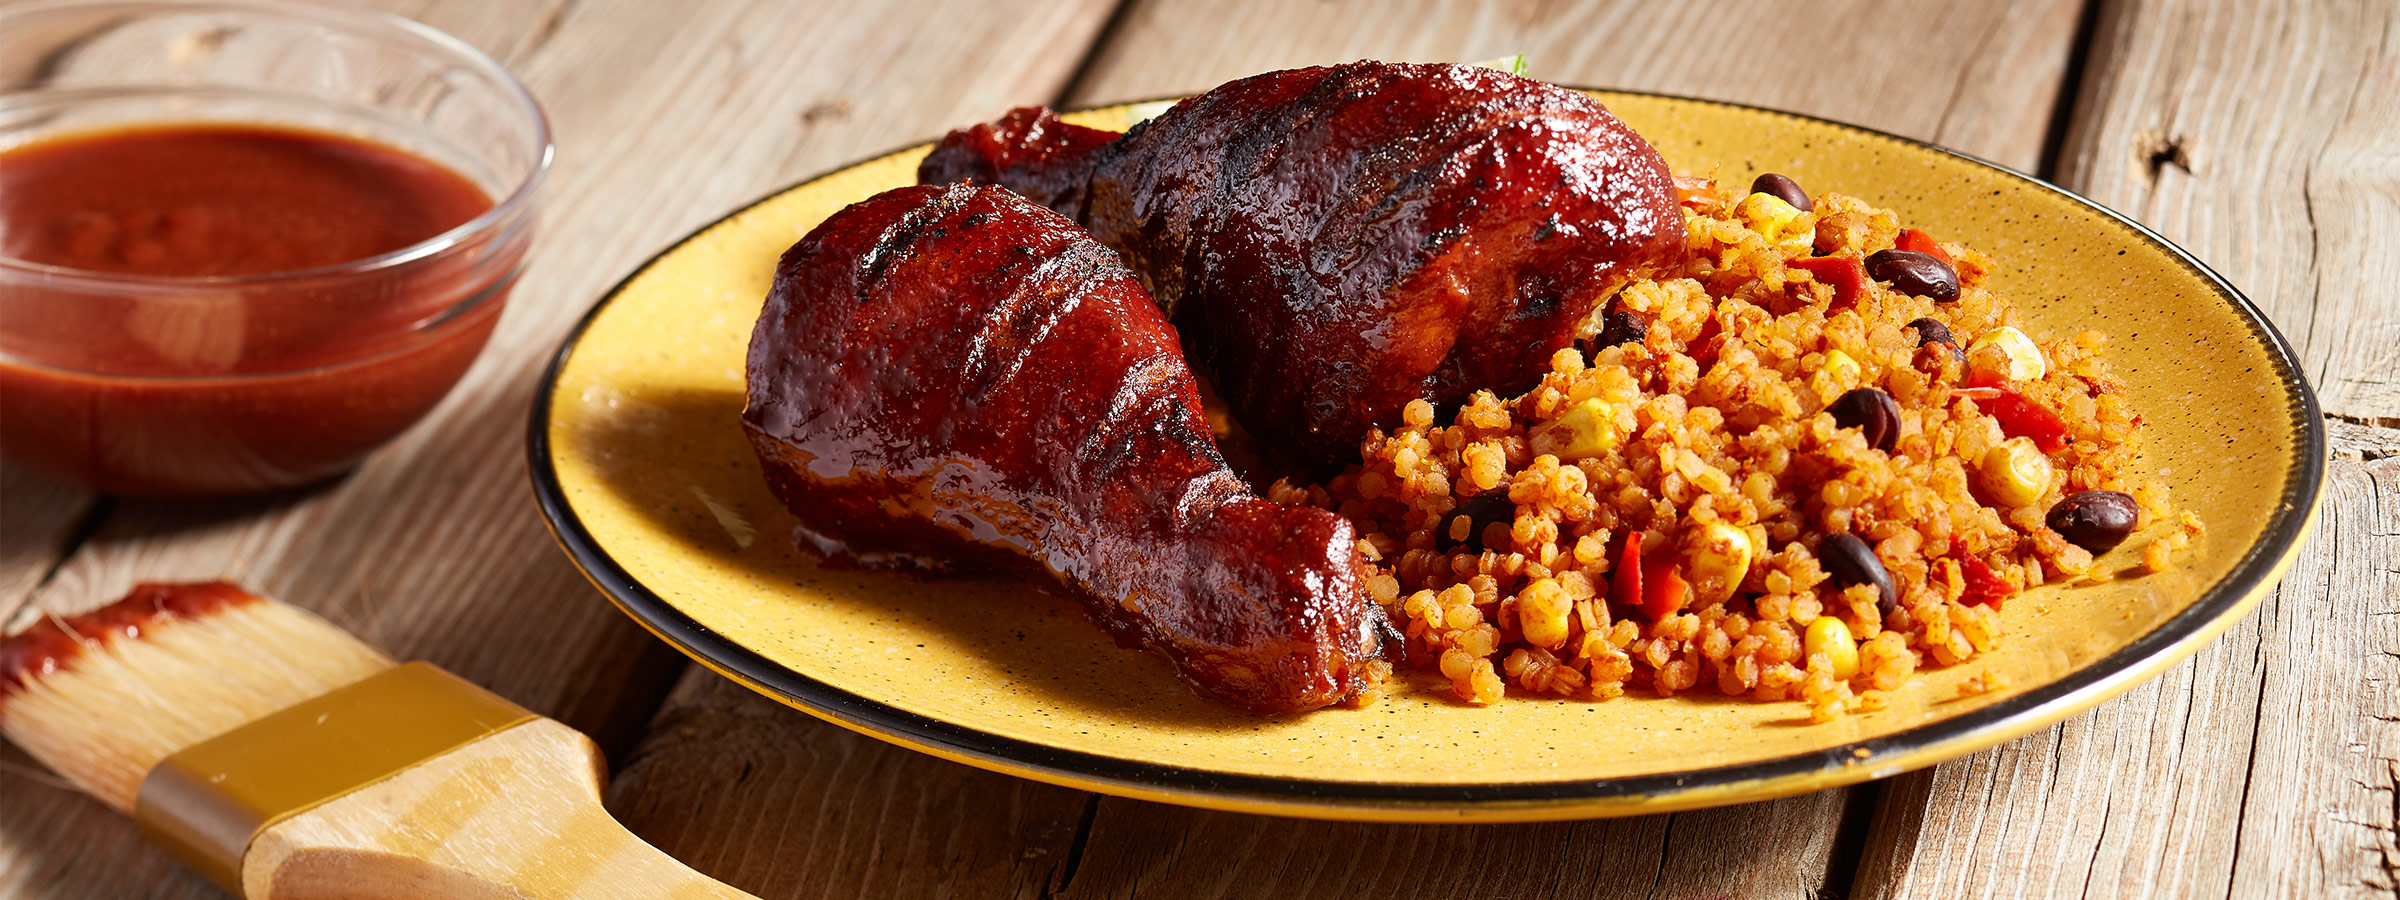 A yellow plate on a wooden table holds servings of Grilled BBQ Chicken with Quinoa.